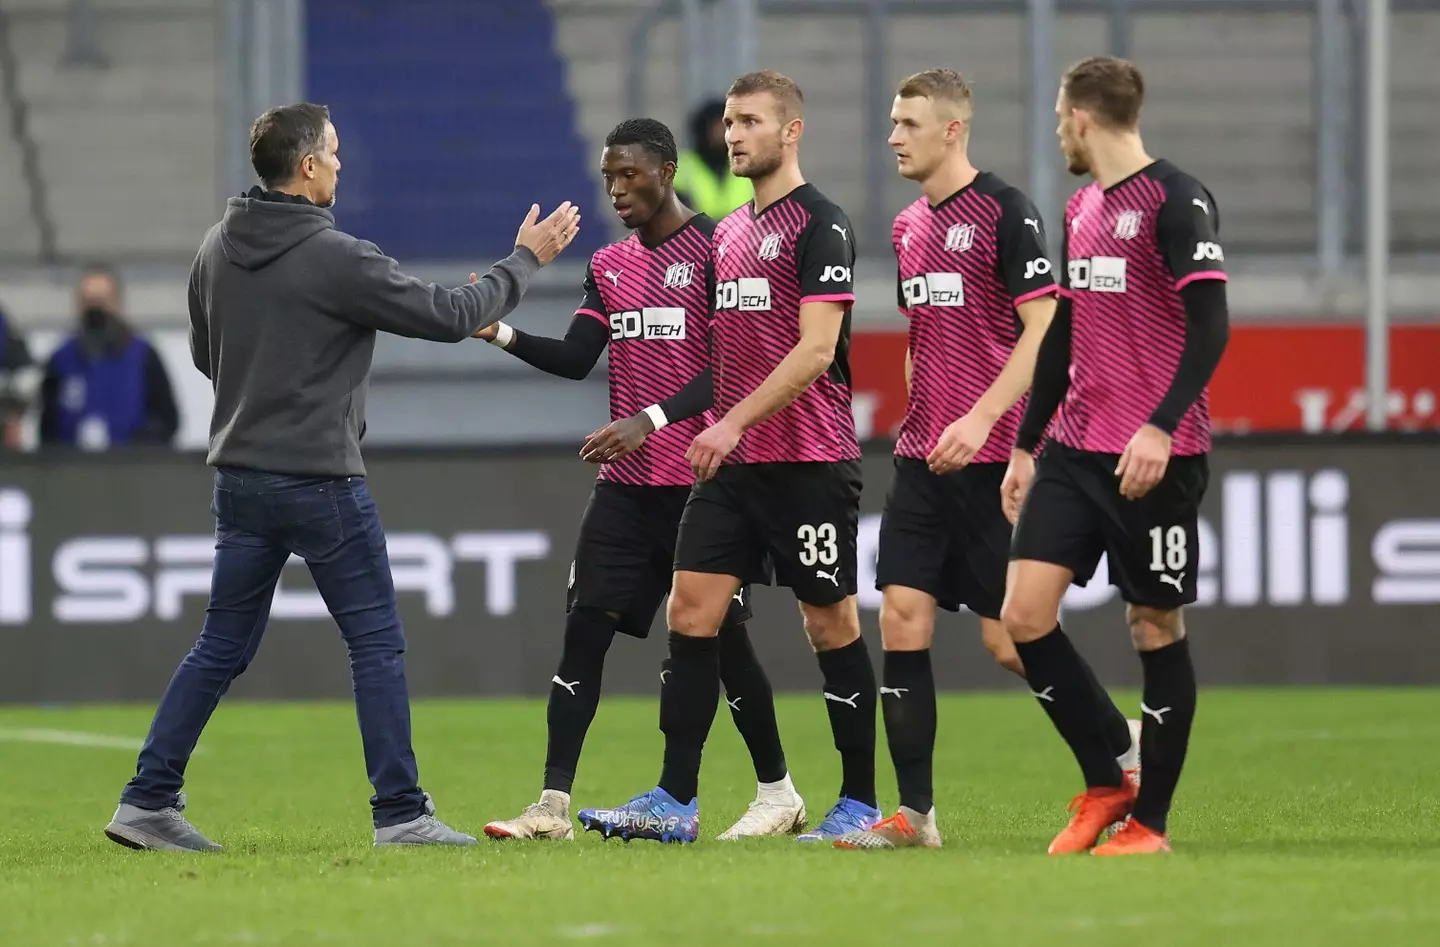 Both sets of players walked off the pitch after the incident (Image credit: Alamy)